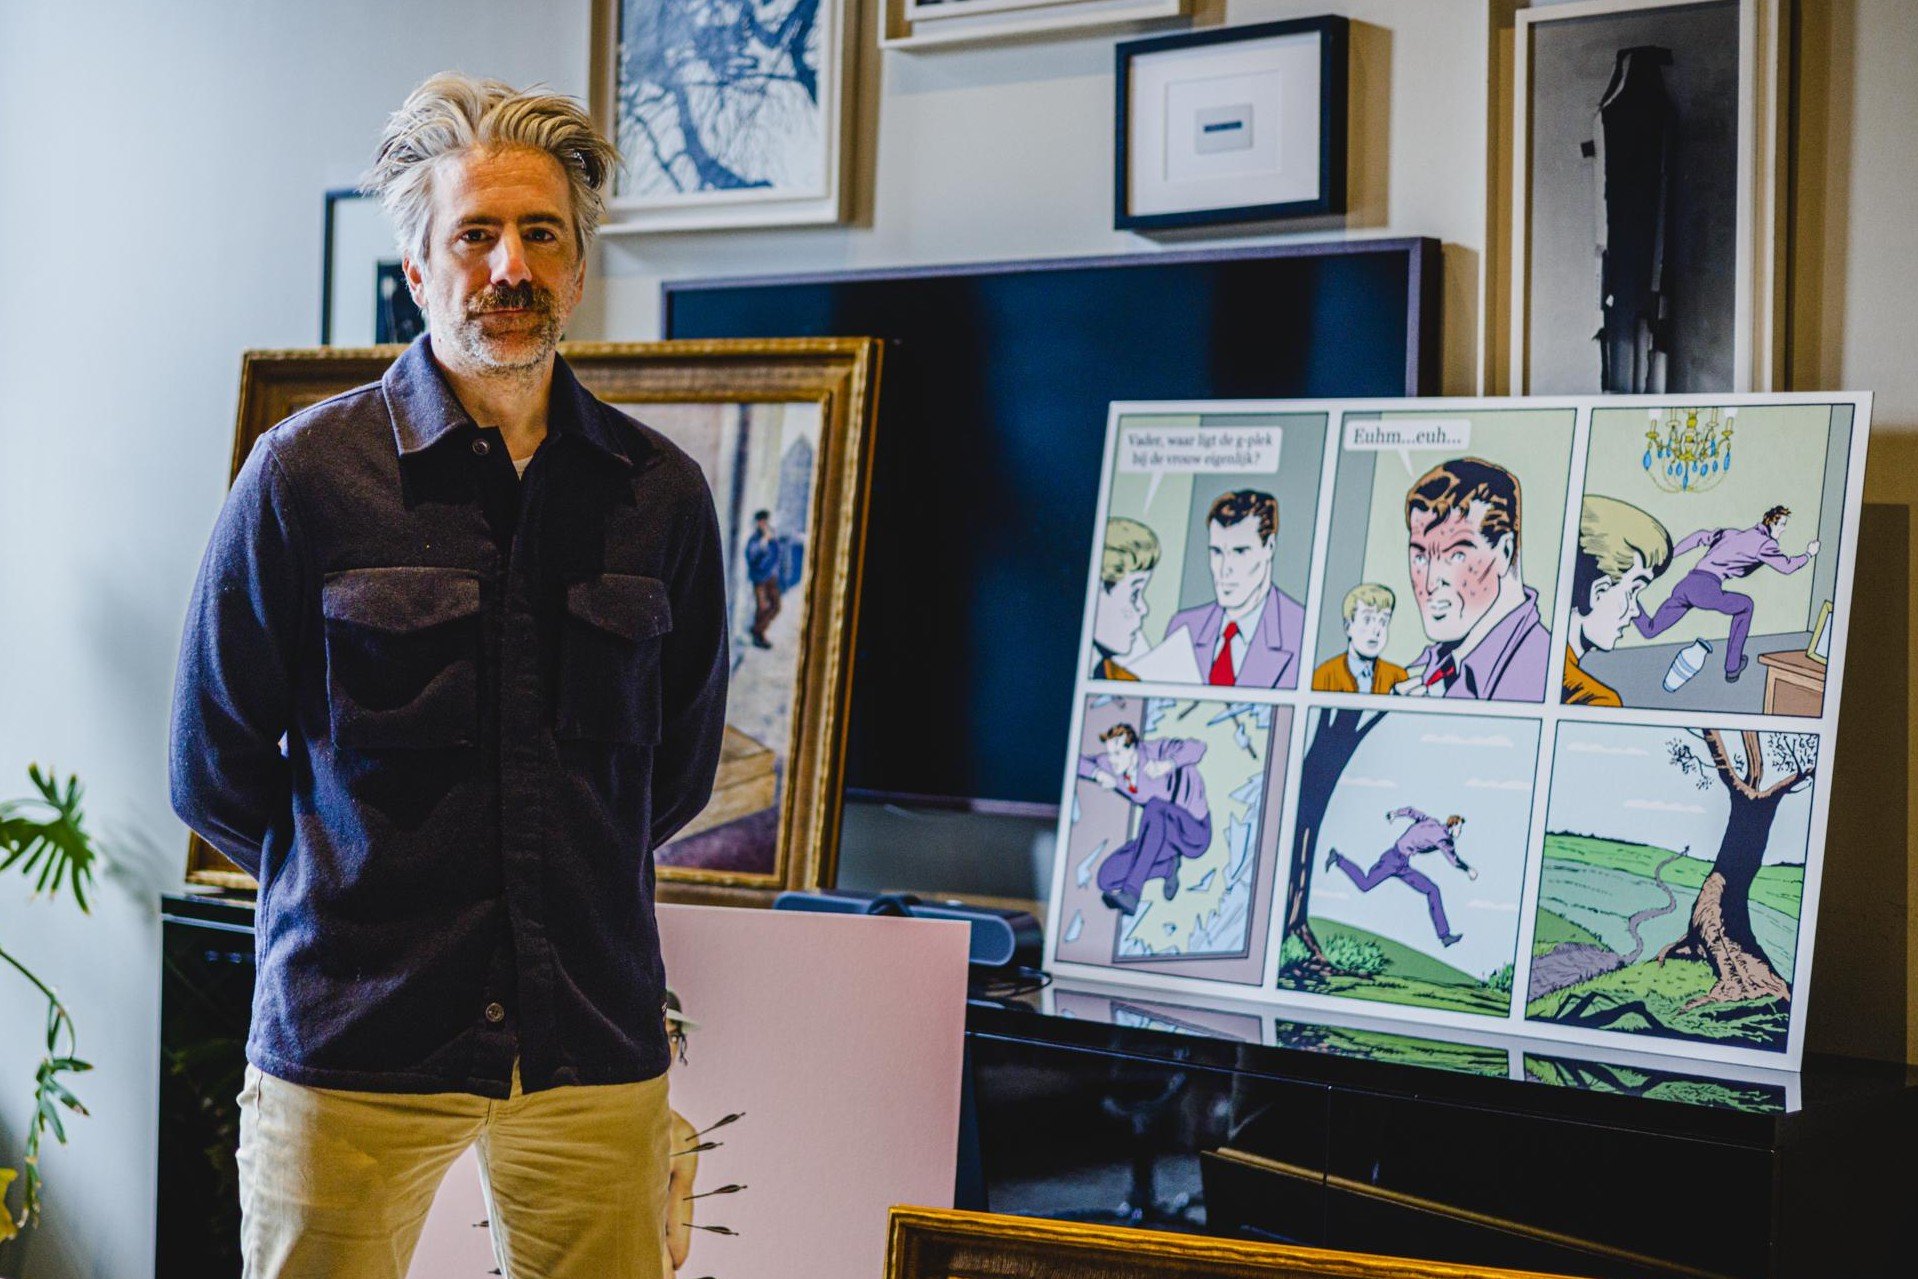 The picture shows Flemish cartoonist Jeroom Snelders who is releasing his first ever NFT collection on Venly